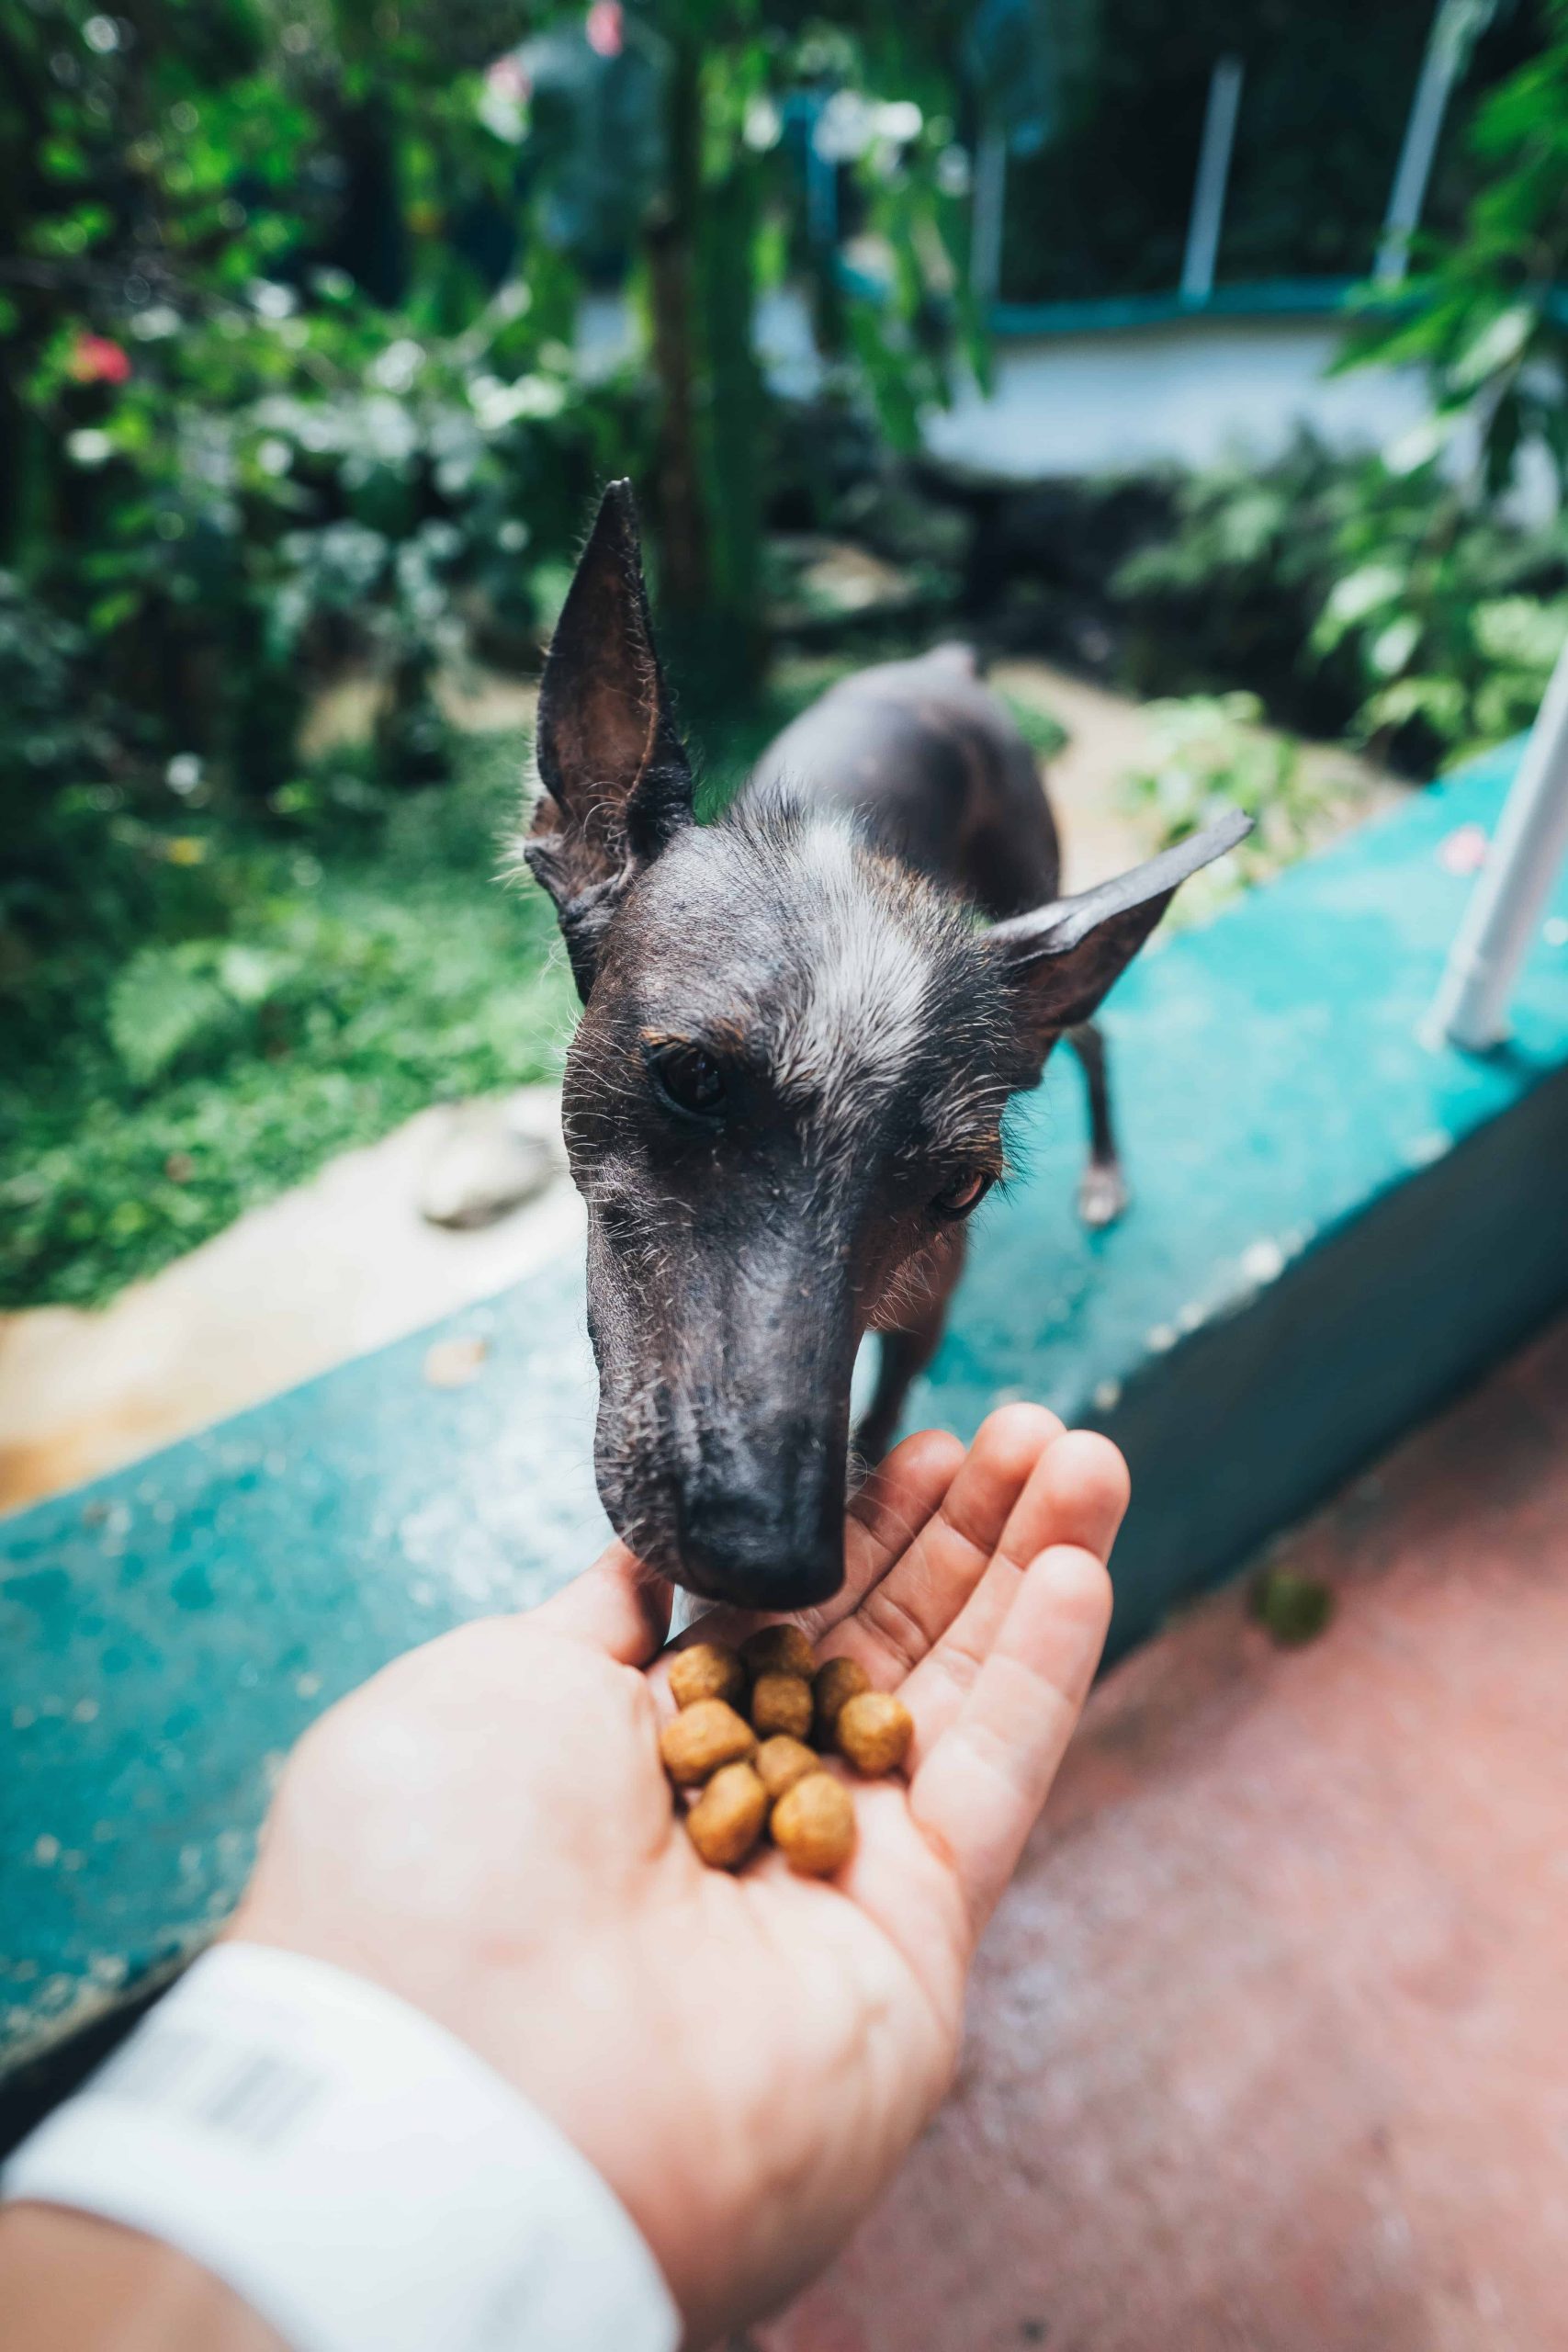 What should you feed your dog?